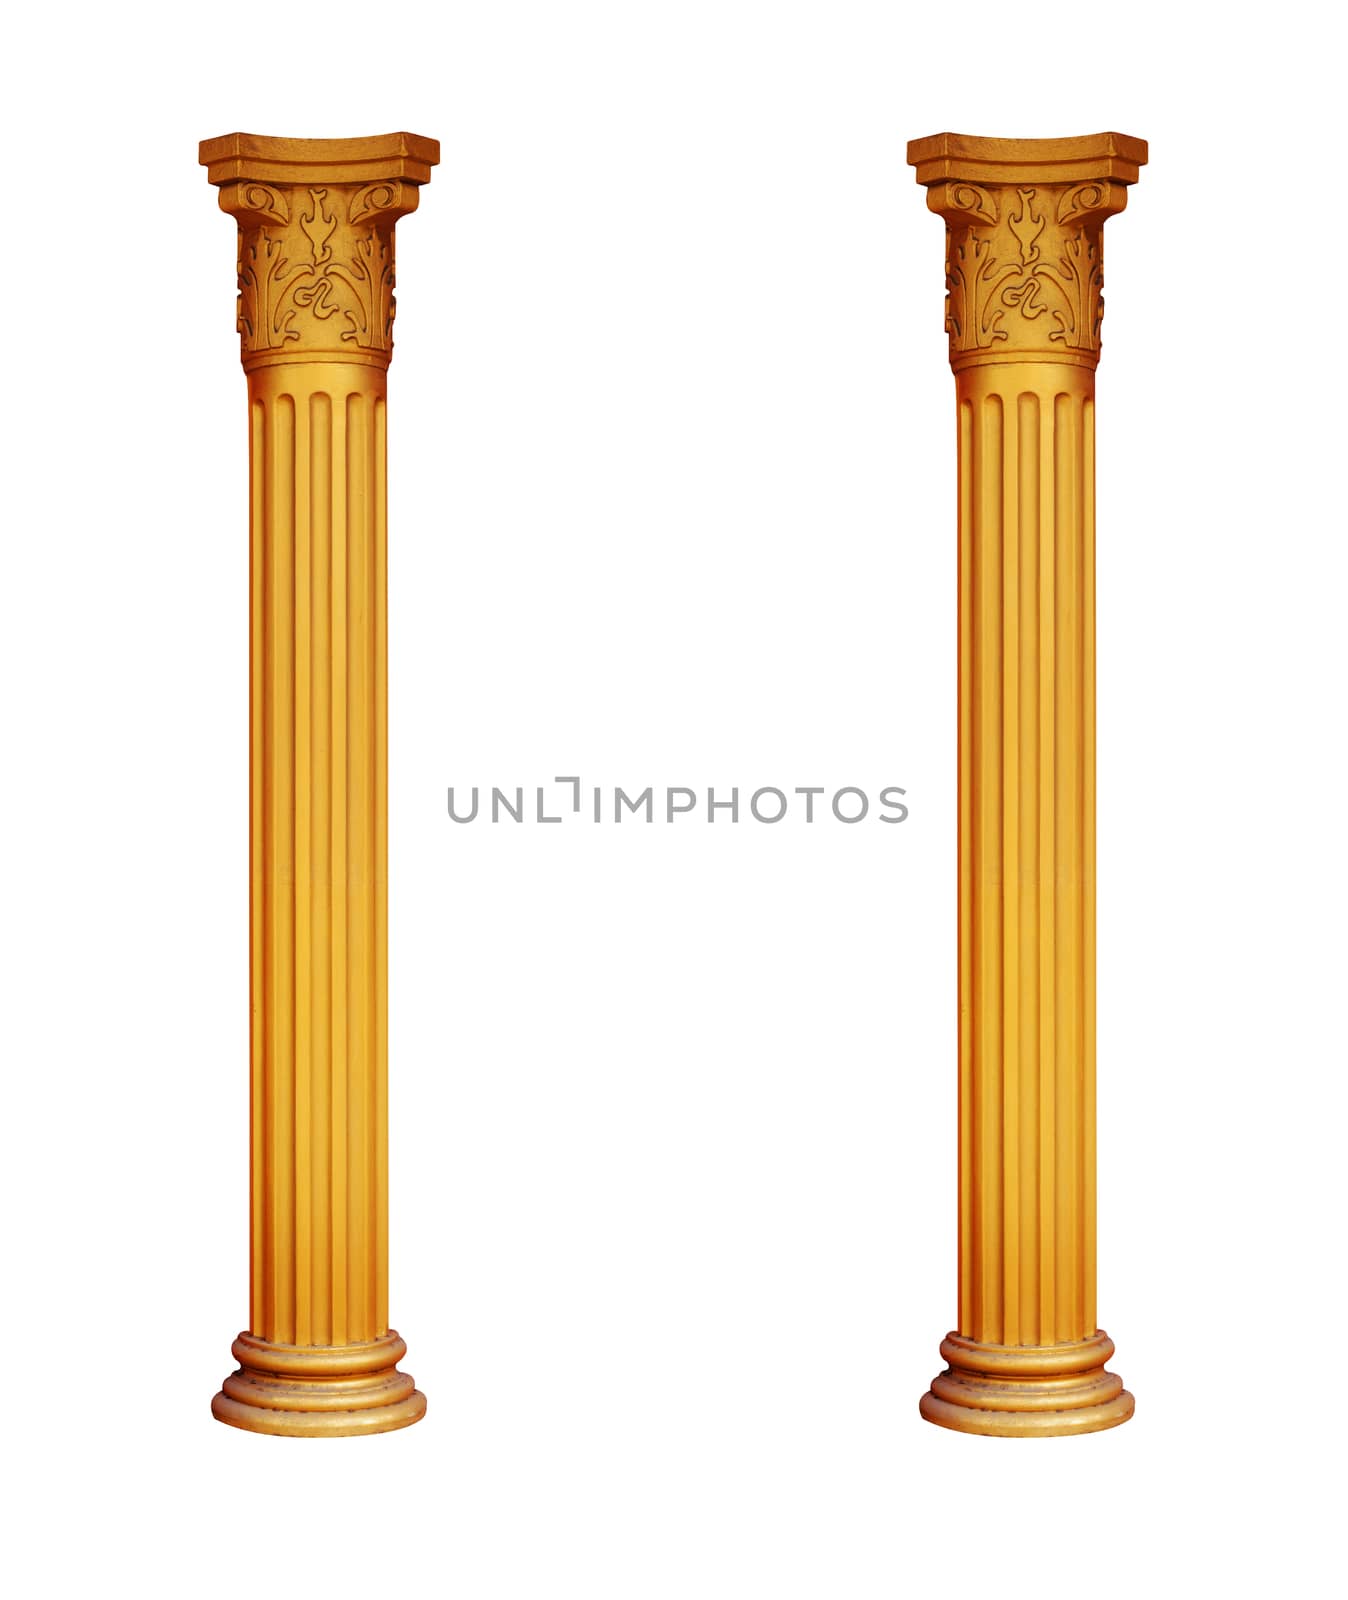 gilded two columns isolated on white background.